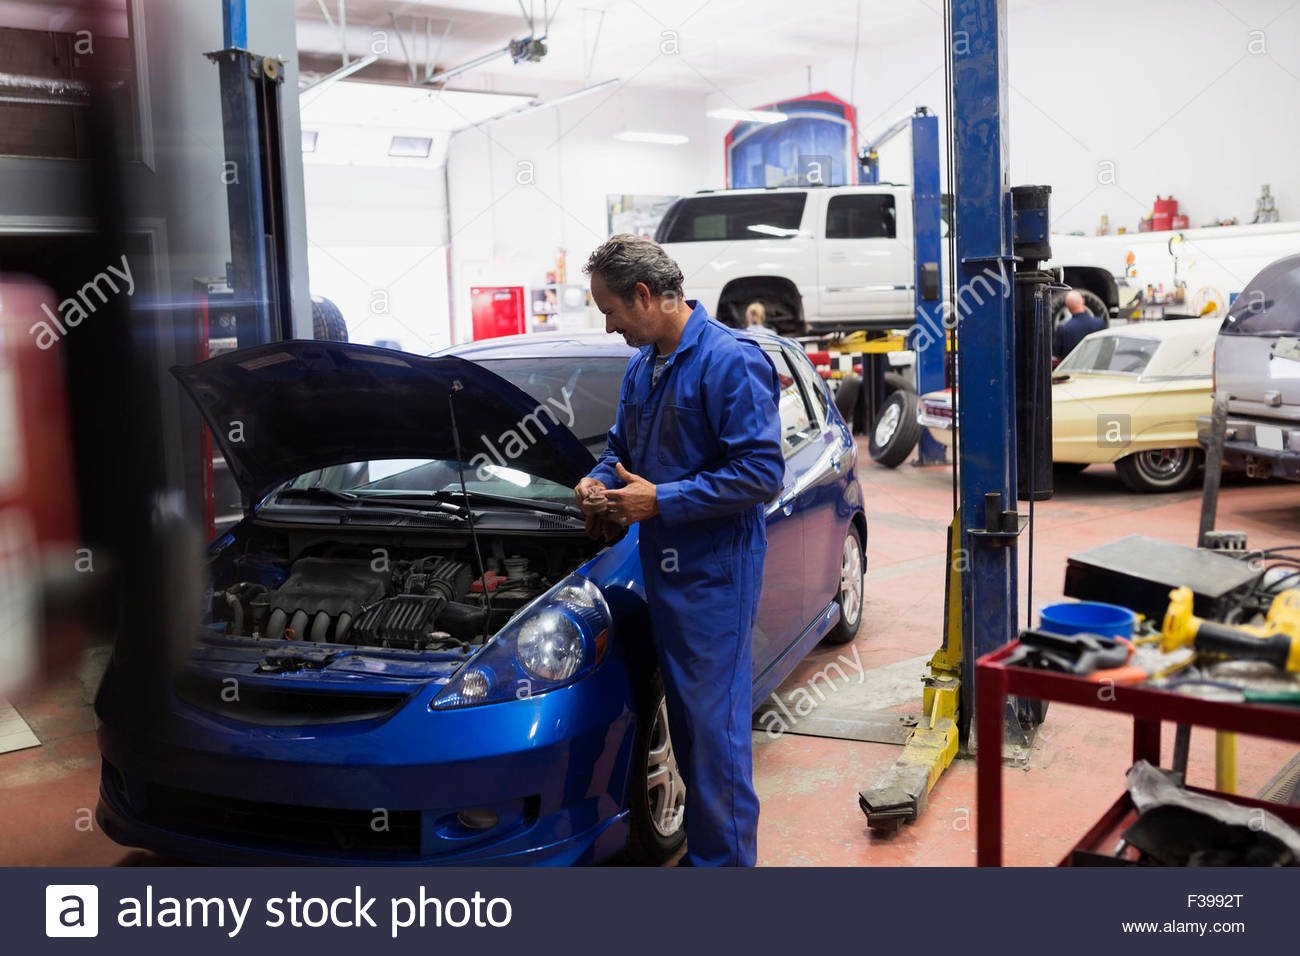 Mechanic looking down at engine auto repair shop Stock Photo